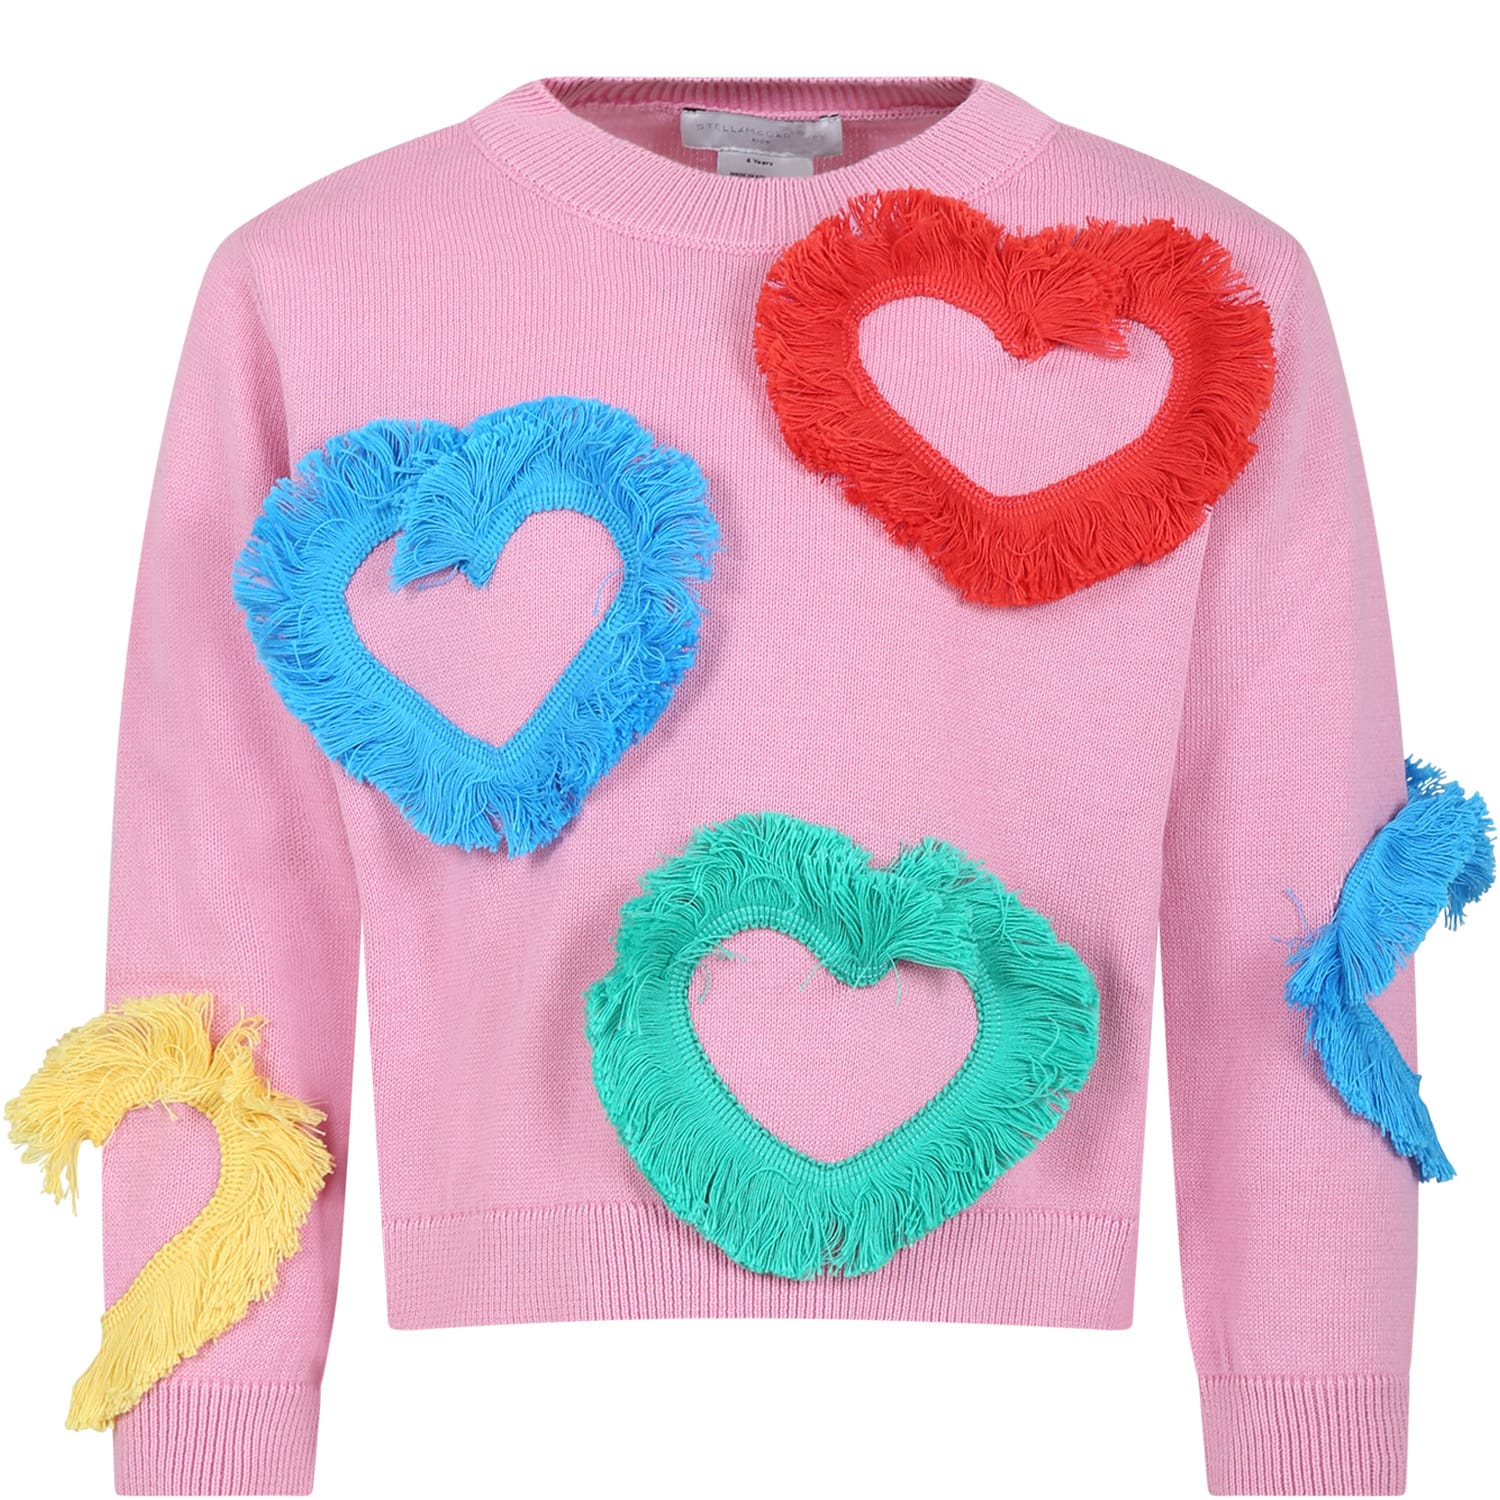 STELLA MCCARTNEY PINK SWEATER FOR GIRL WITH HEARTS